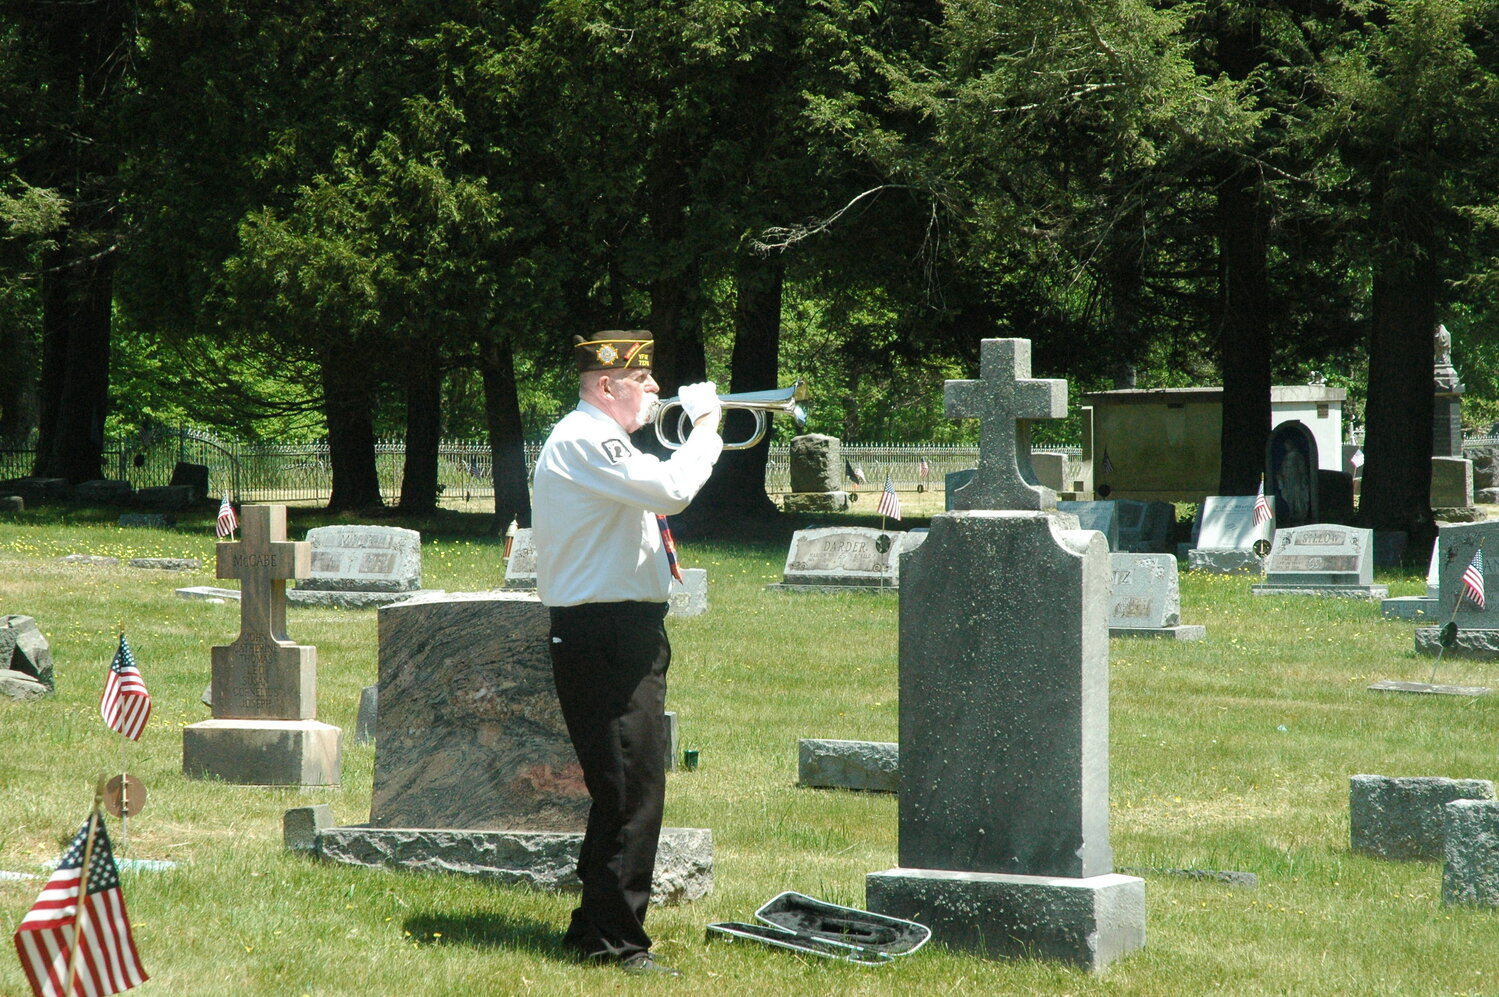 Marine veteran Robert Lepple performs Taps on his bugle in the Long Eddy Cemetery to honor those who made the ultimate sacrifice in service of our country.